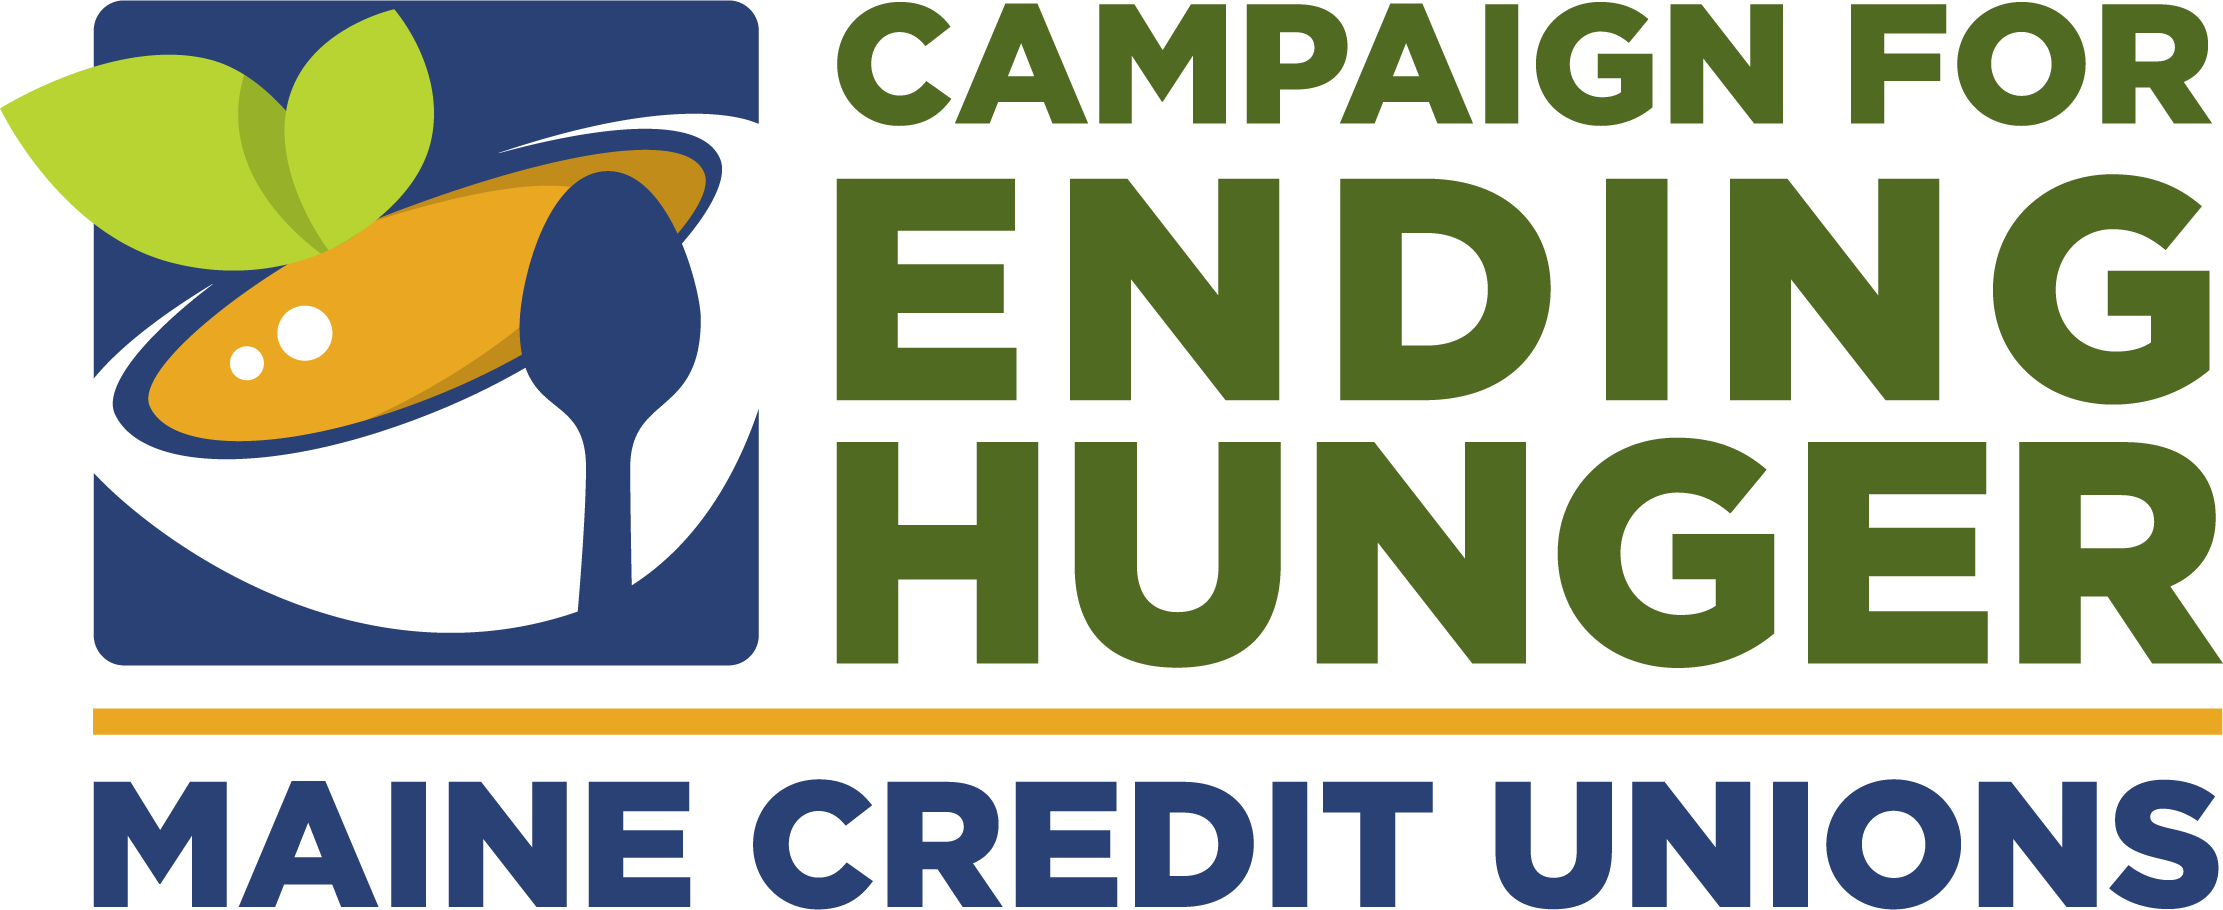 Campaign for Ending Hunger Maine Credit Unions Logo